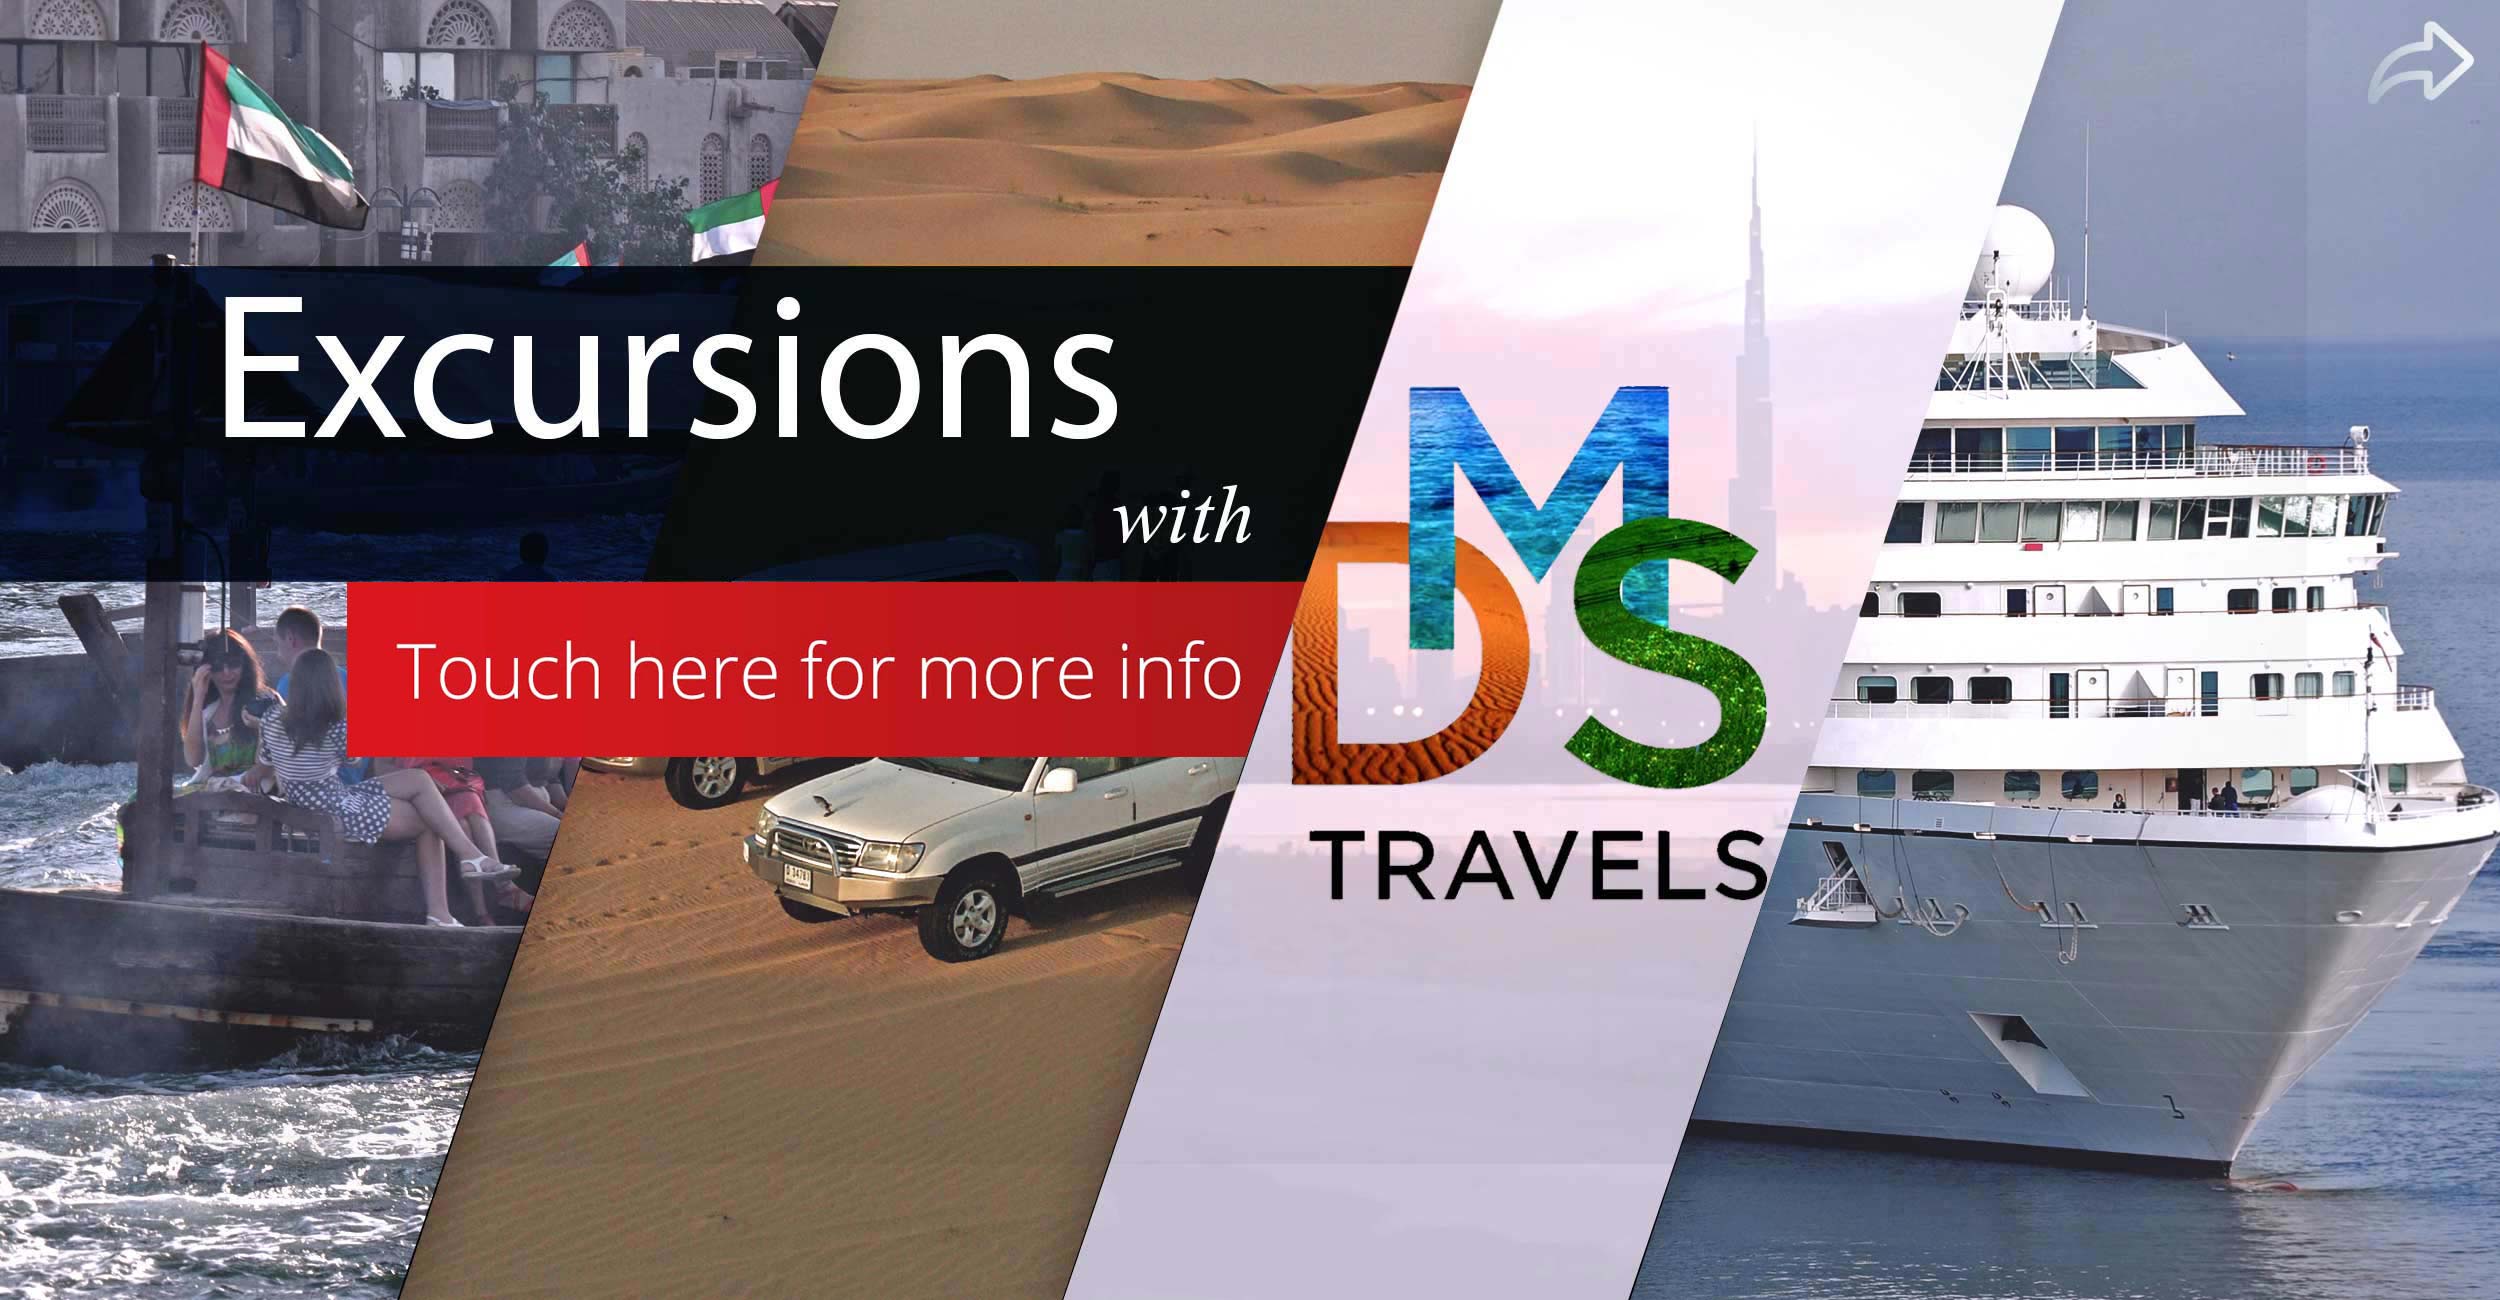 Excursions with DMS Travels